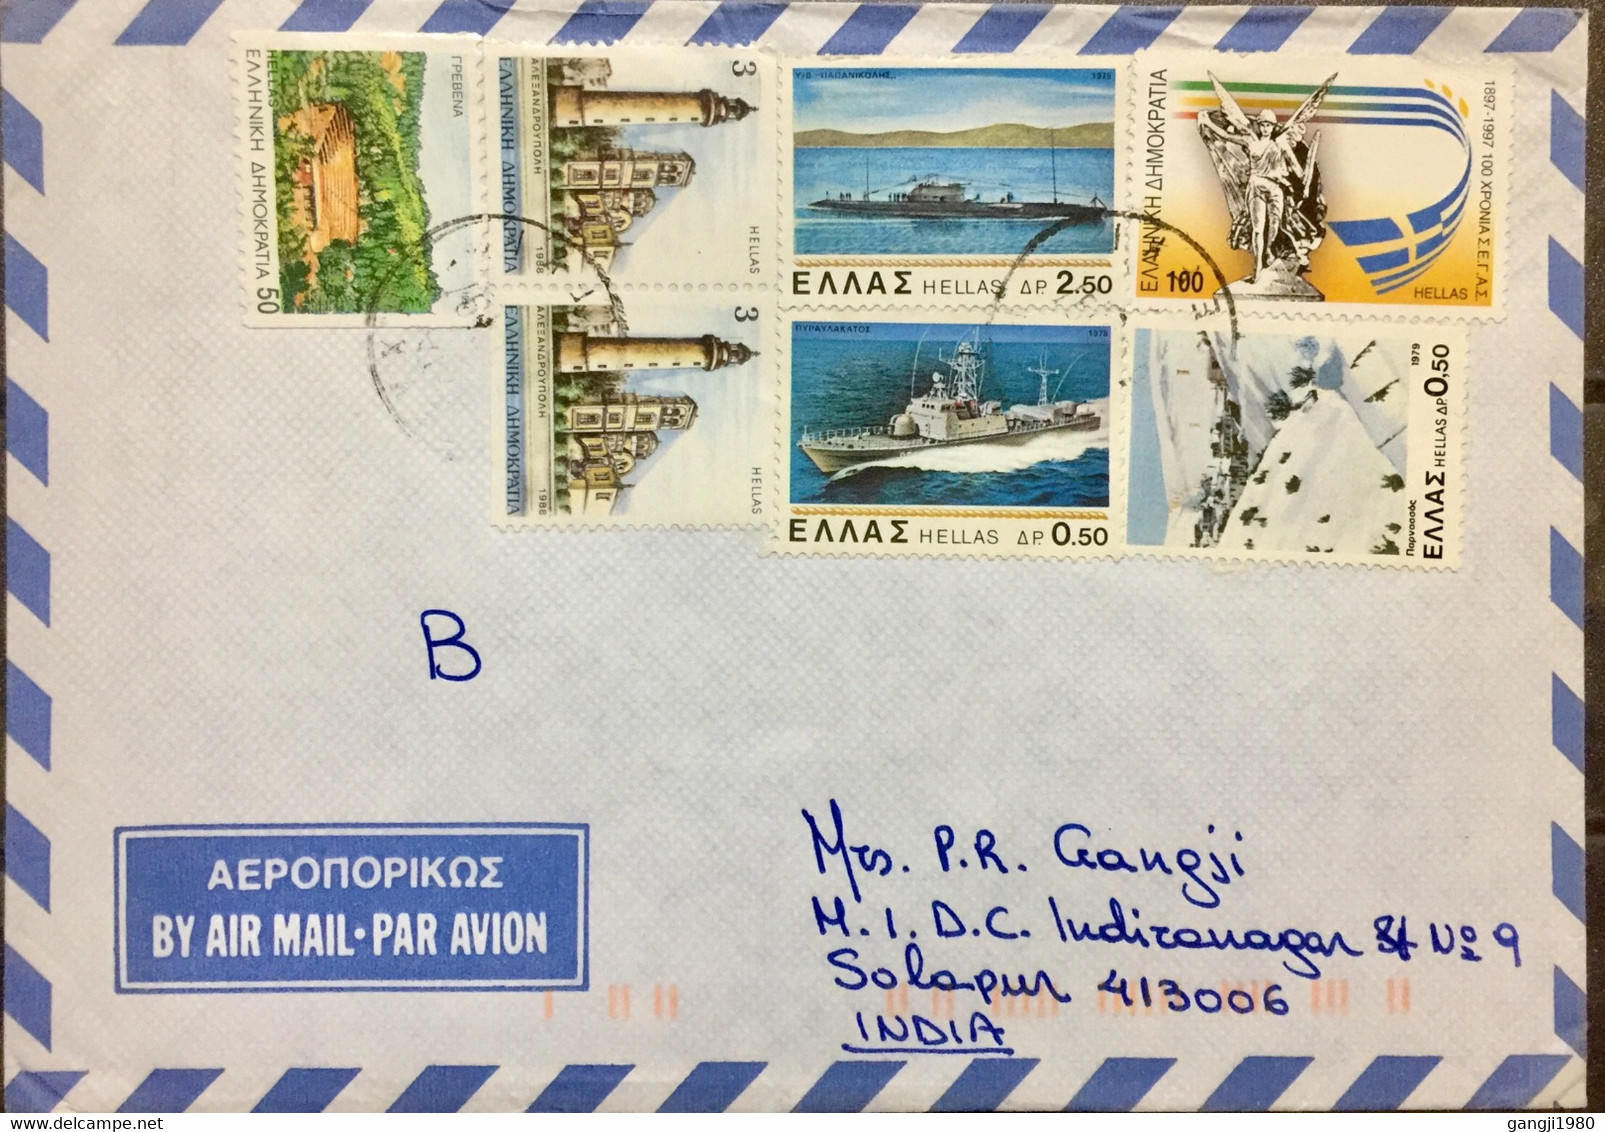 GREECE 1997, USED AIRMAIL COVER TO INDIA,DIFFERENT 7 STAMPS SHIP ,LIGHT HOUSE,FLAG,NATURE,SNOW -MOUNTAIN STATUE, BUILDIN - 1941-45 Occupation Japonaise